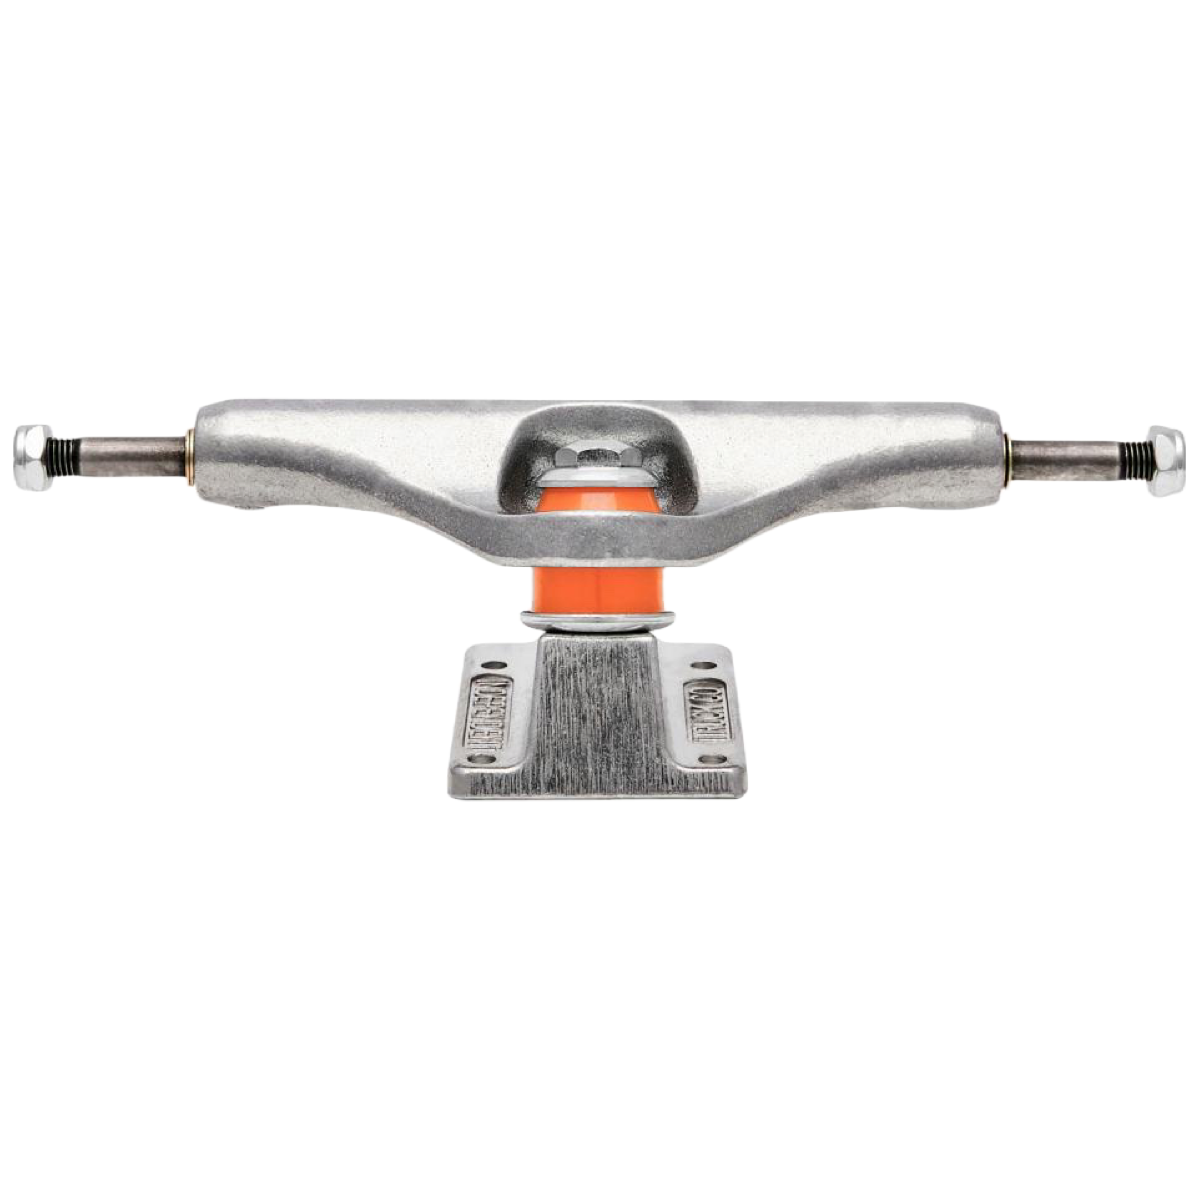 Independent Trucks - MiD Forged Hollow Trucks (Pair)